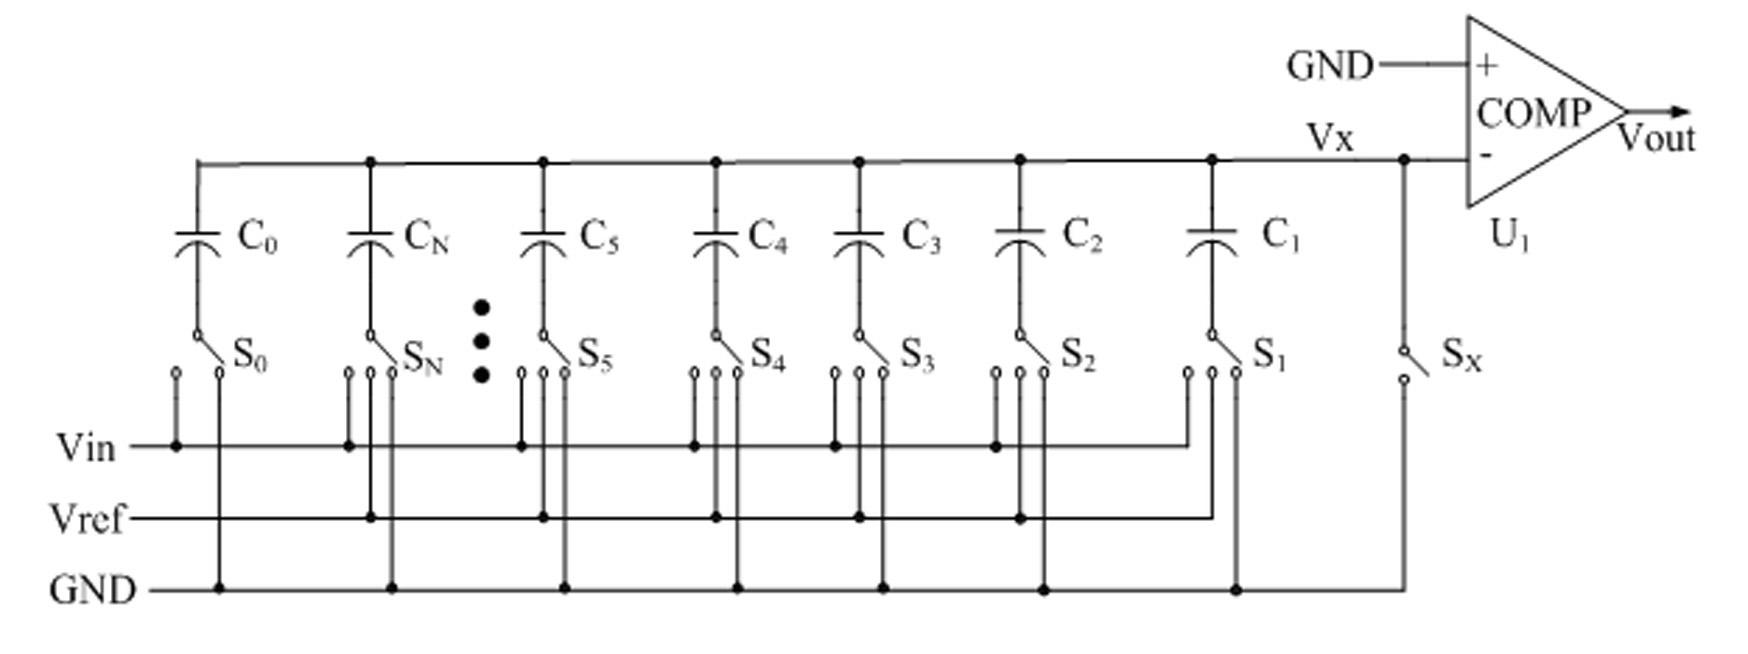 Successive approximation register analog-to-digital conversion circuit for realizing minimal dynamic range